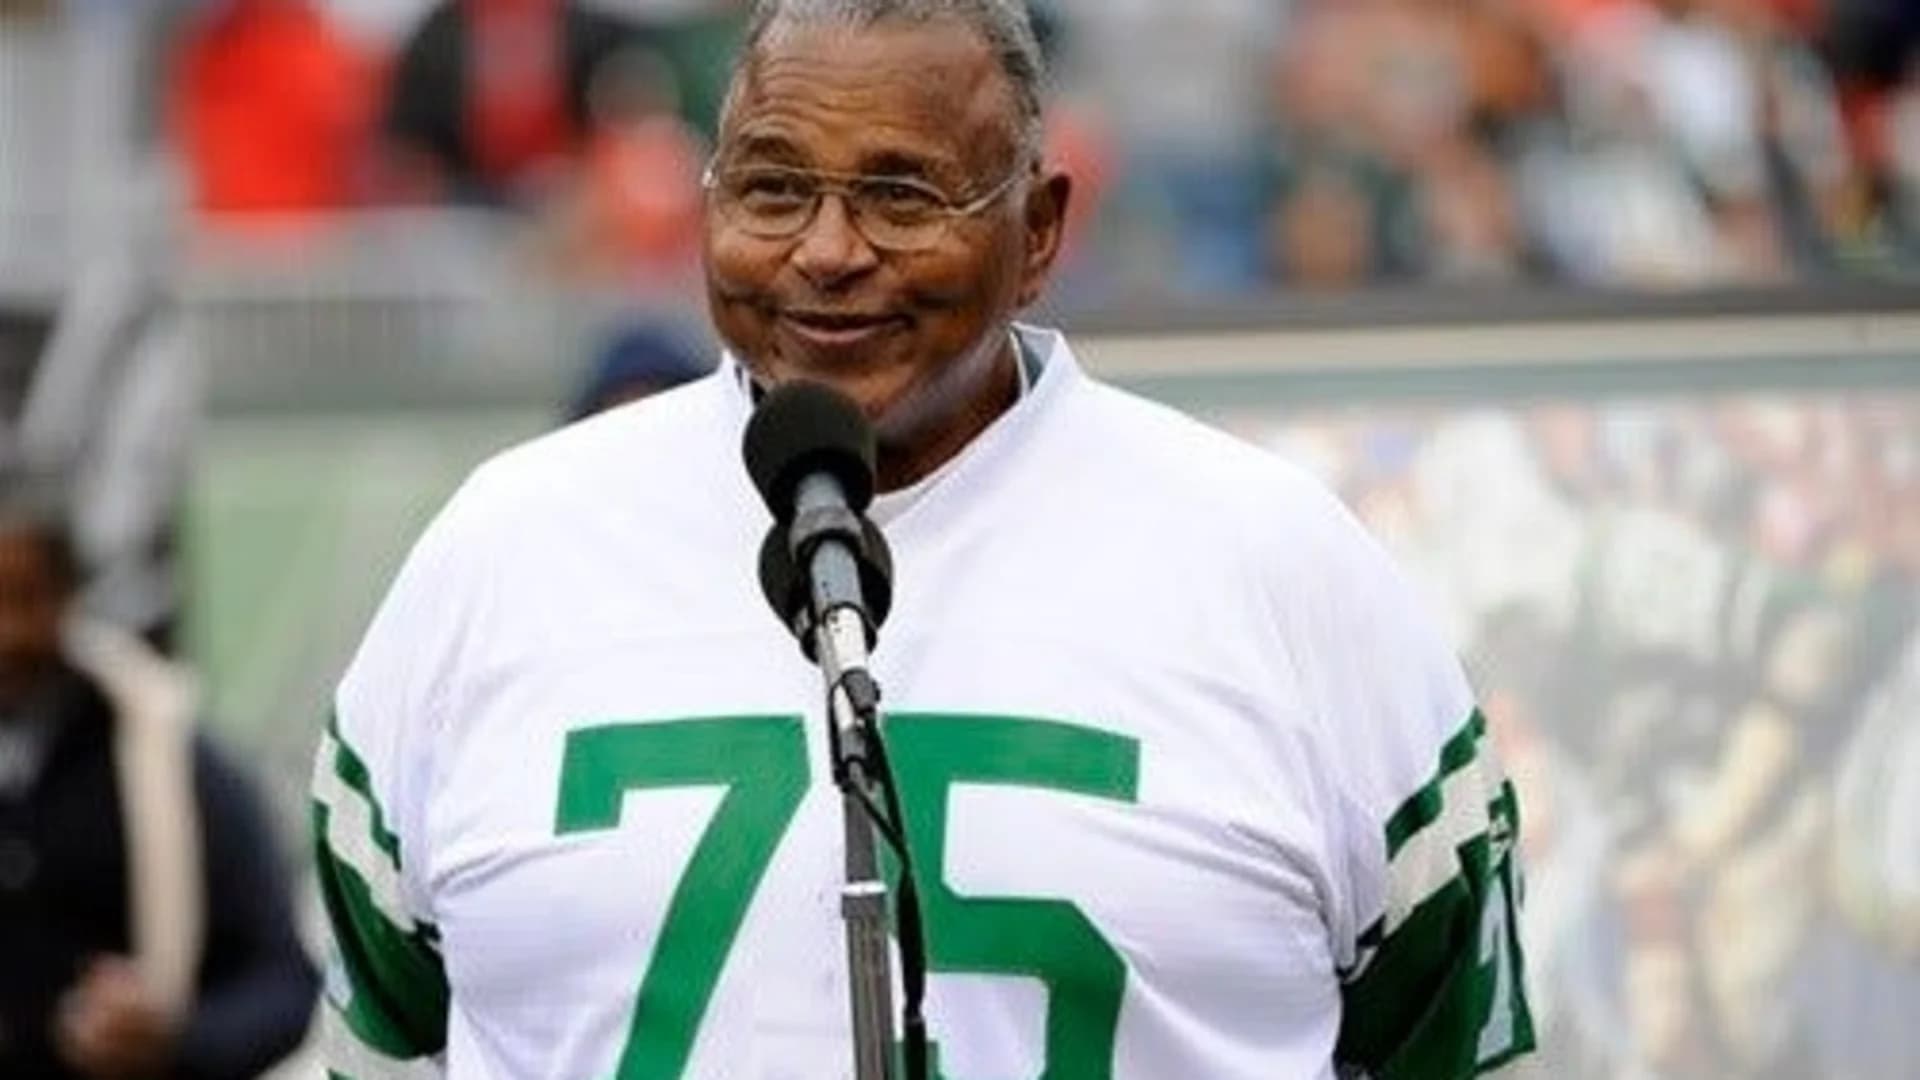 Jets offensive lineman, Giants GM voted into Pro Football Hall of Fame